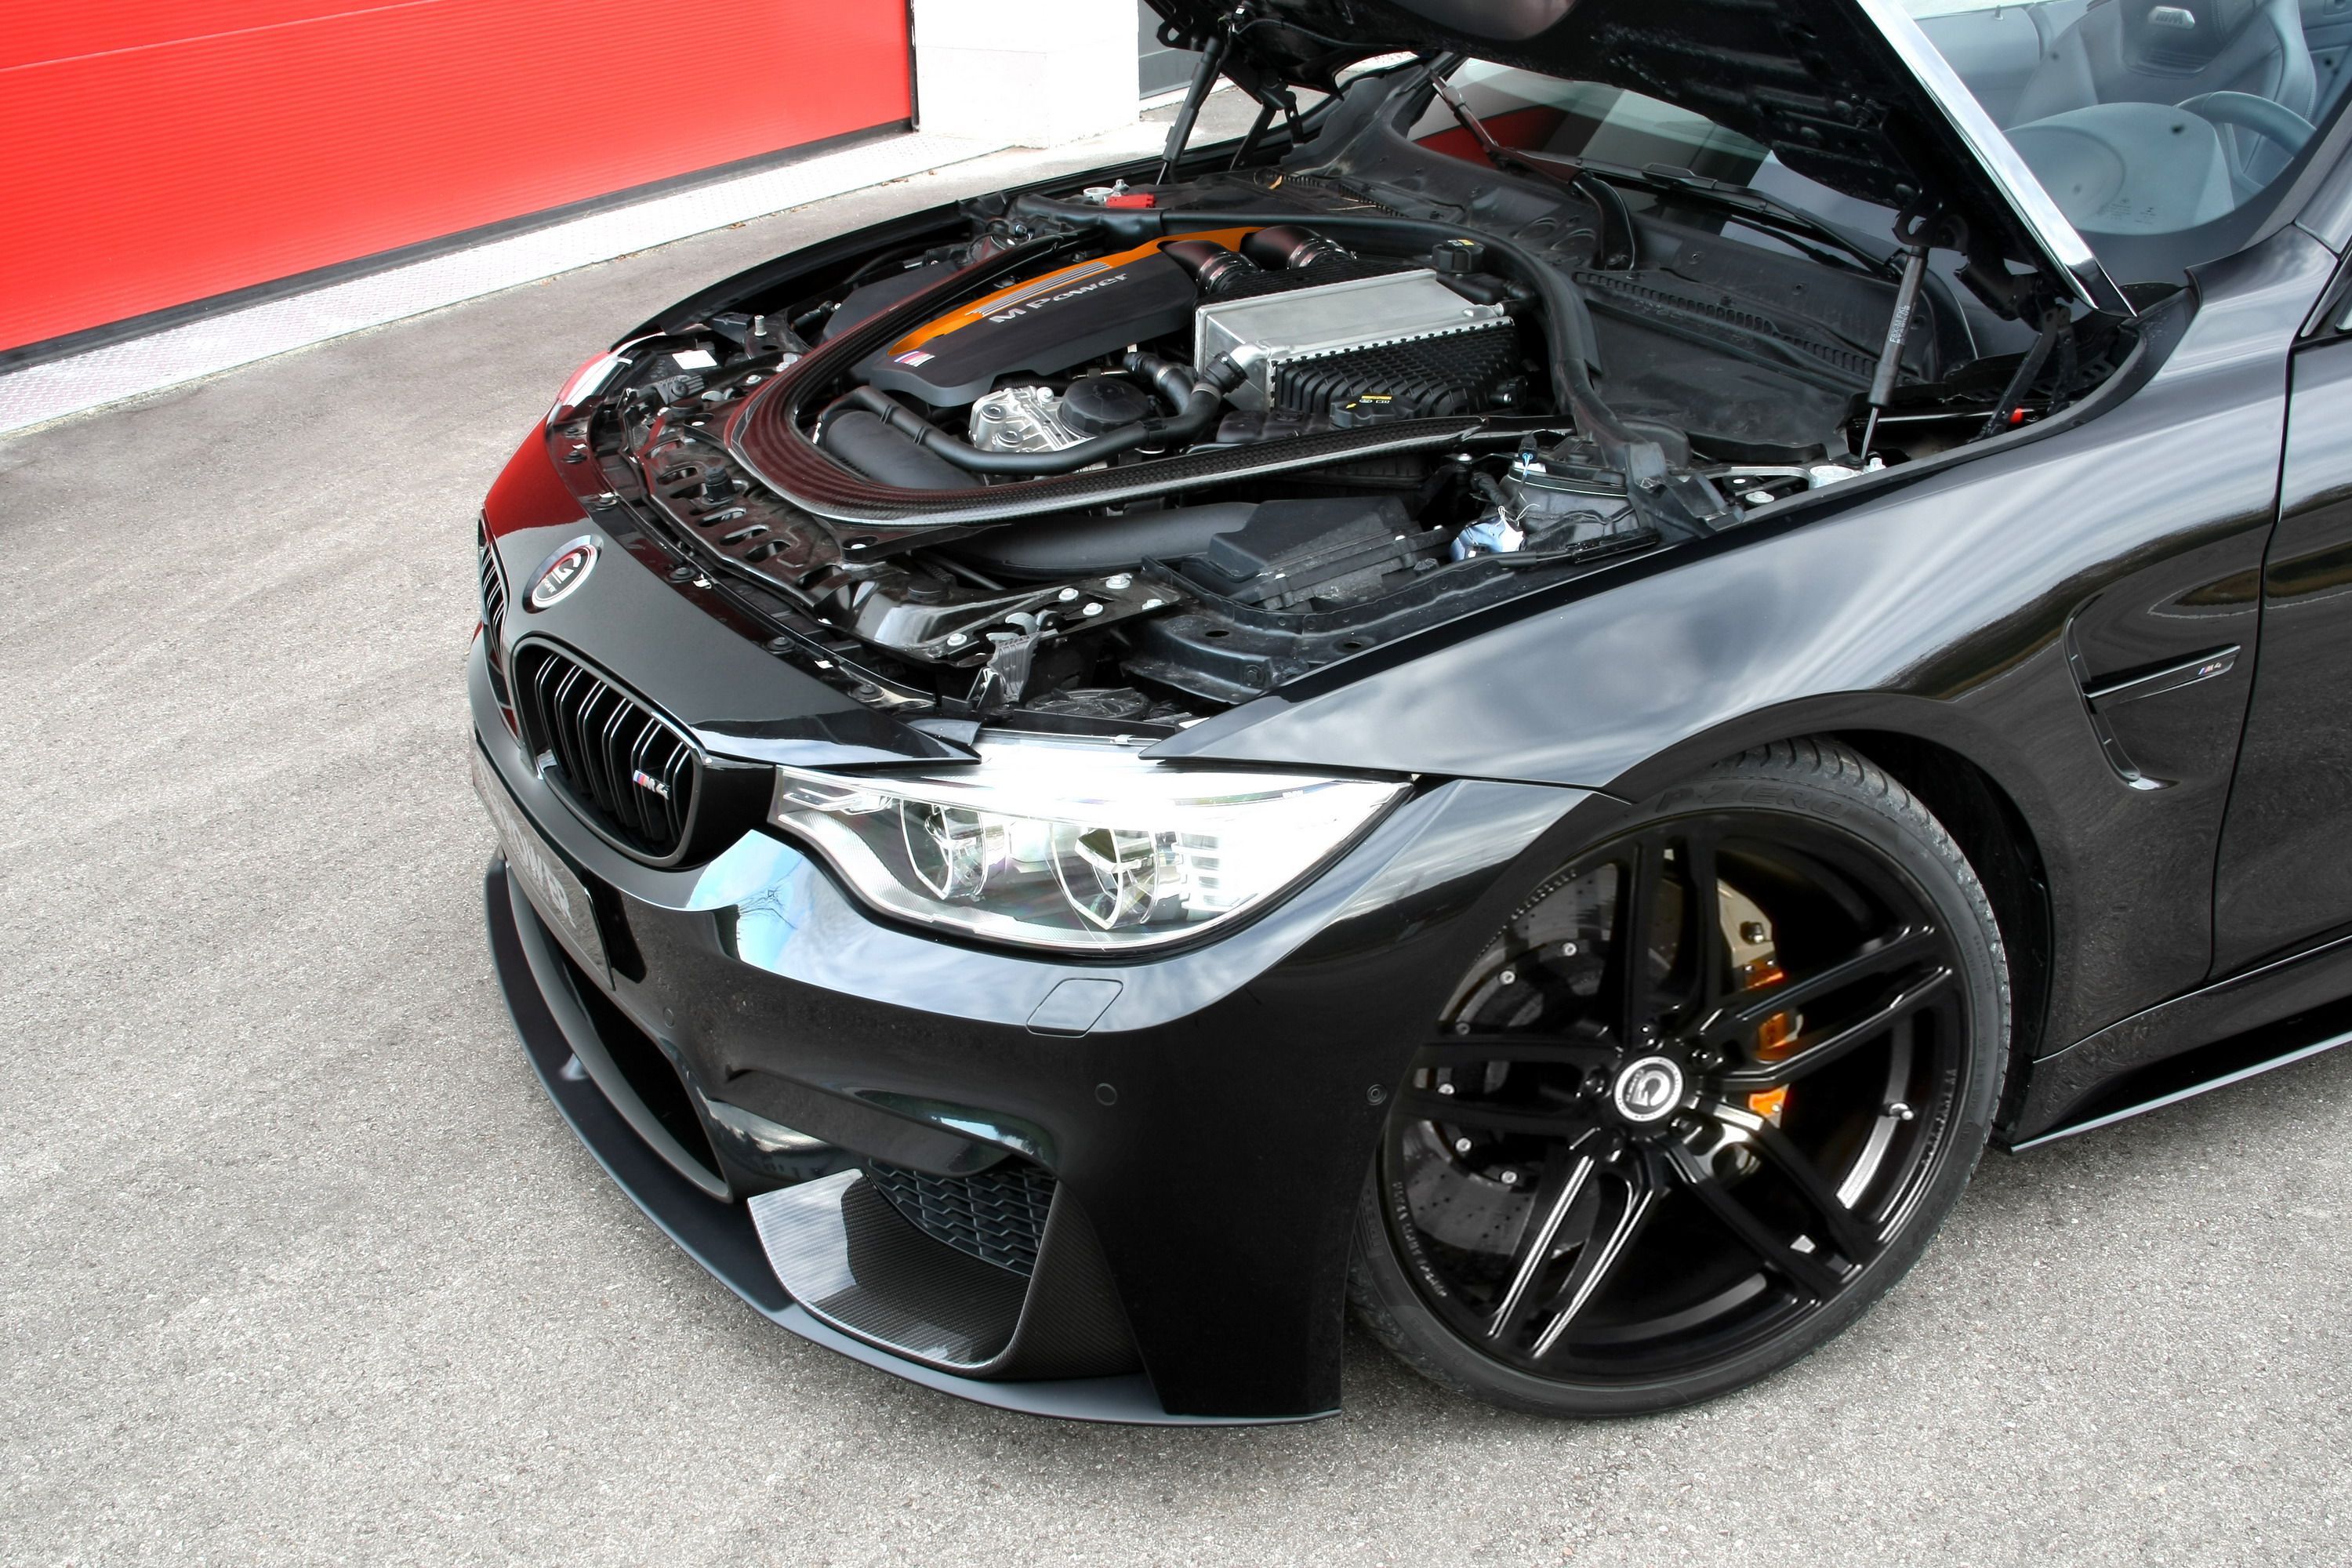 2016 BMW M4 Convertible by G Power